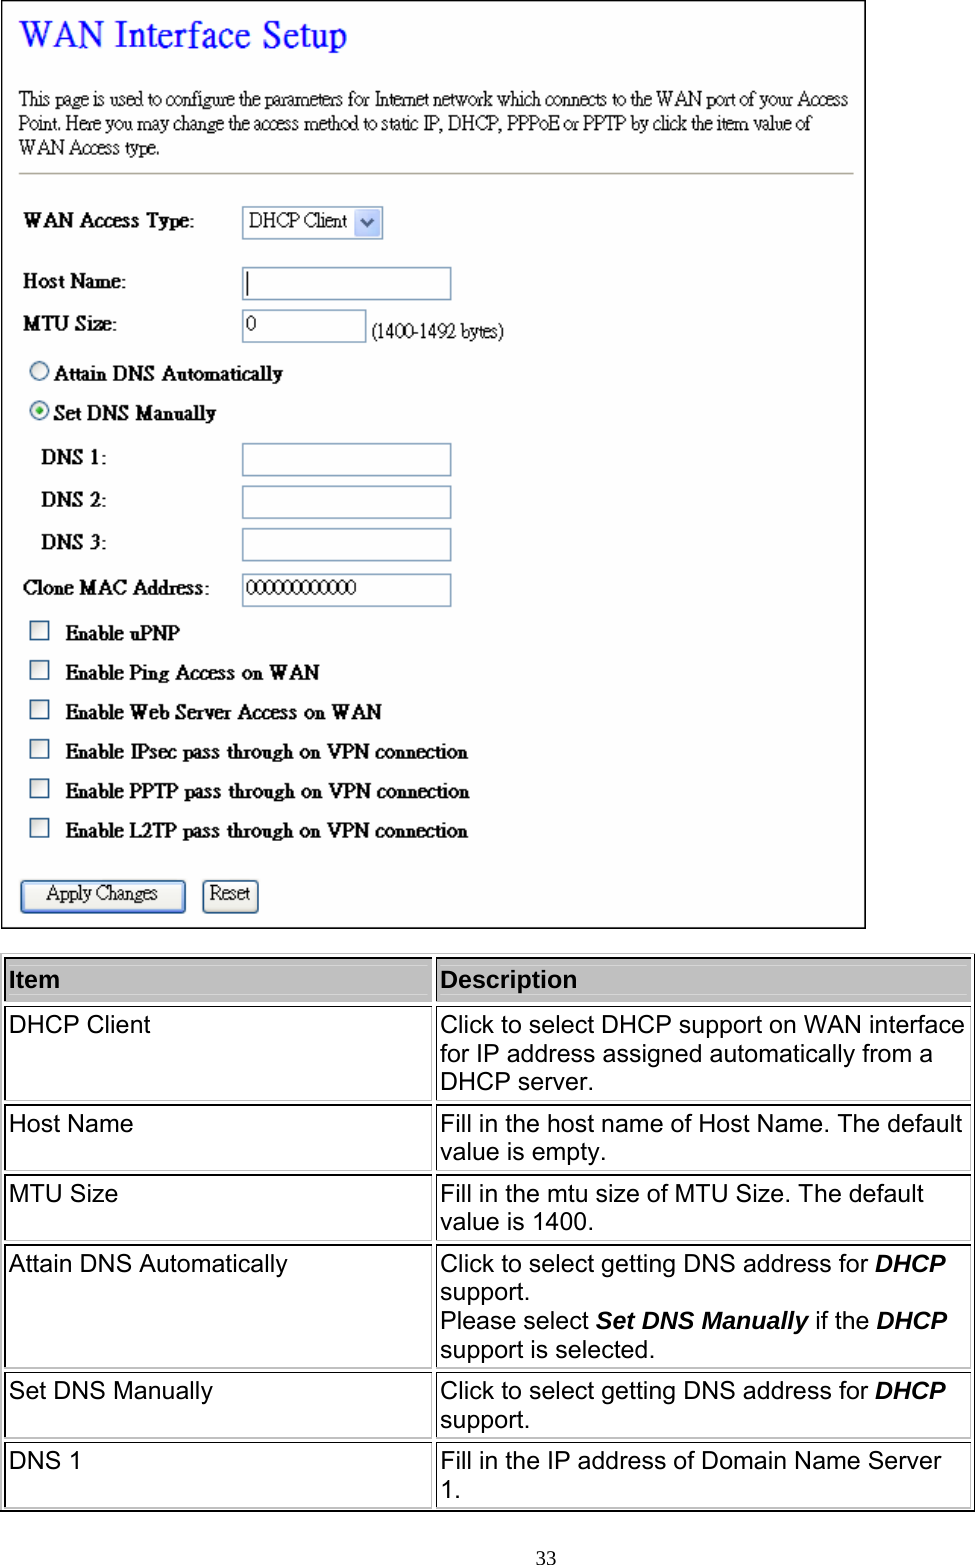   Item  Description DHCP Client  Click to select DHCP support on WAN interface for IP address assigned automatically from a DHCP server. Host Name  Fill in the host name of Host Name. The default value is empty. MTU Size  Fill in the mtu size of MTU Size. The default value is 1400. Attain DNS Automatically  Click to select getting DNS address for DHCP support. Please select Set DNS Manually if the DHCP support is selected. Set DNS Manually  Click to select getting DNS address for DHCP support. DNS 1  Fill in the IP address of Domain Name Server 1.     33